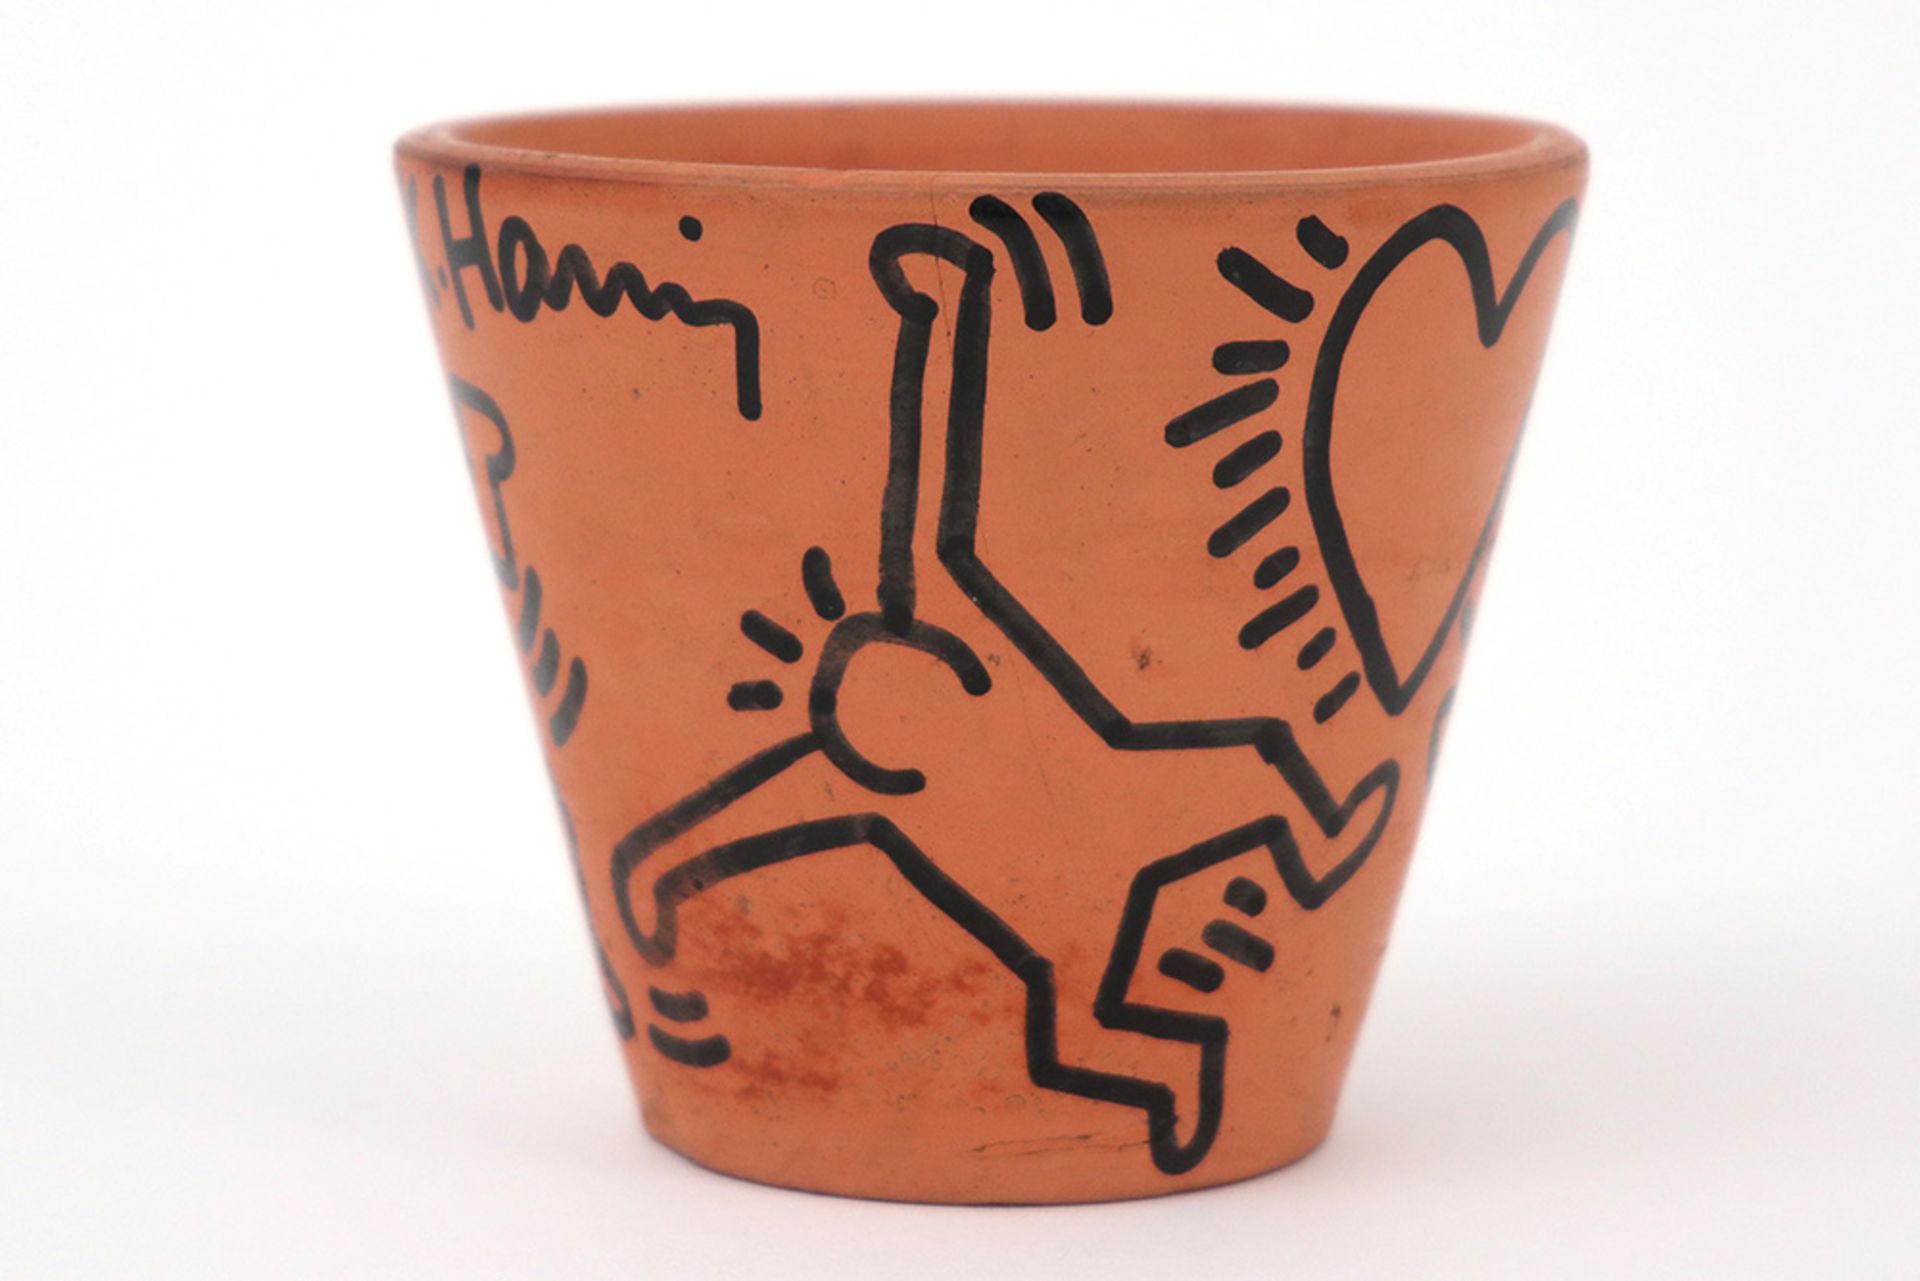 Keith Haring signed drawing in felt-tip pen on ceramic flower pot - dated (19)89 || HARING KEITH ( - Image 3 of 7